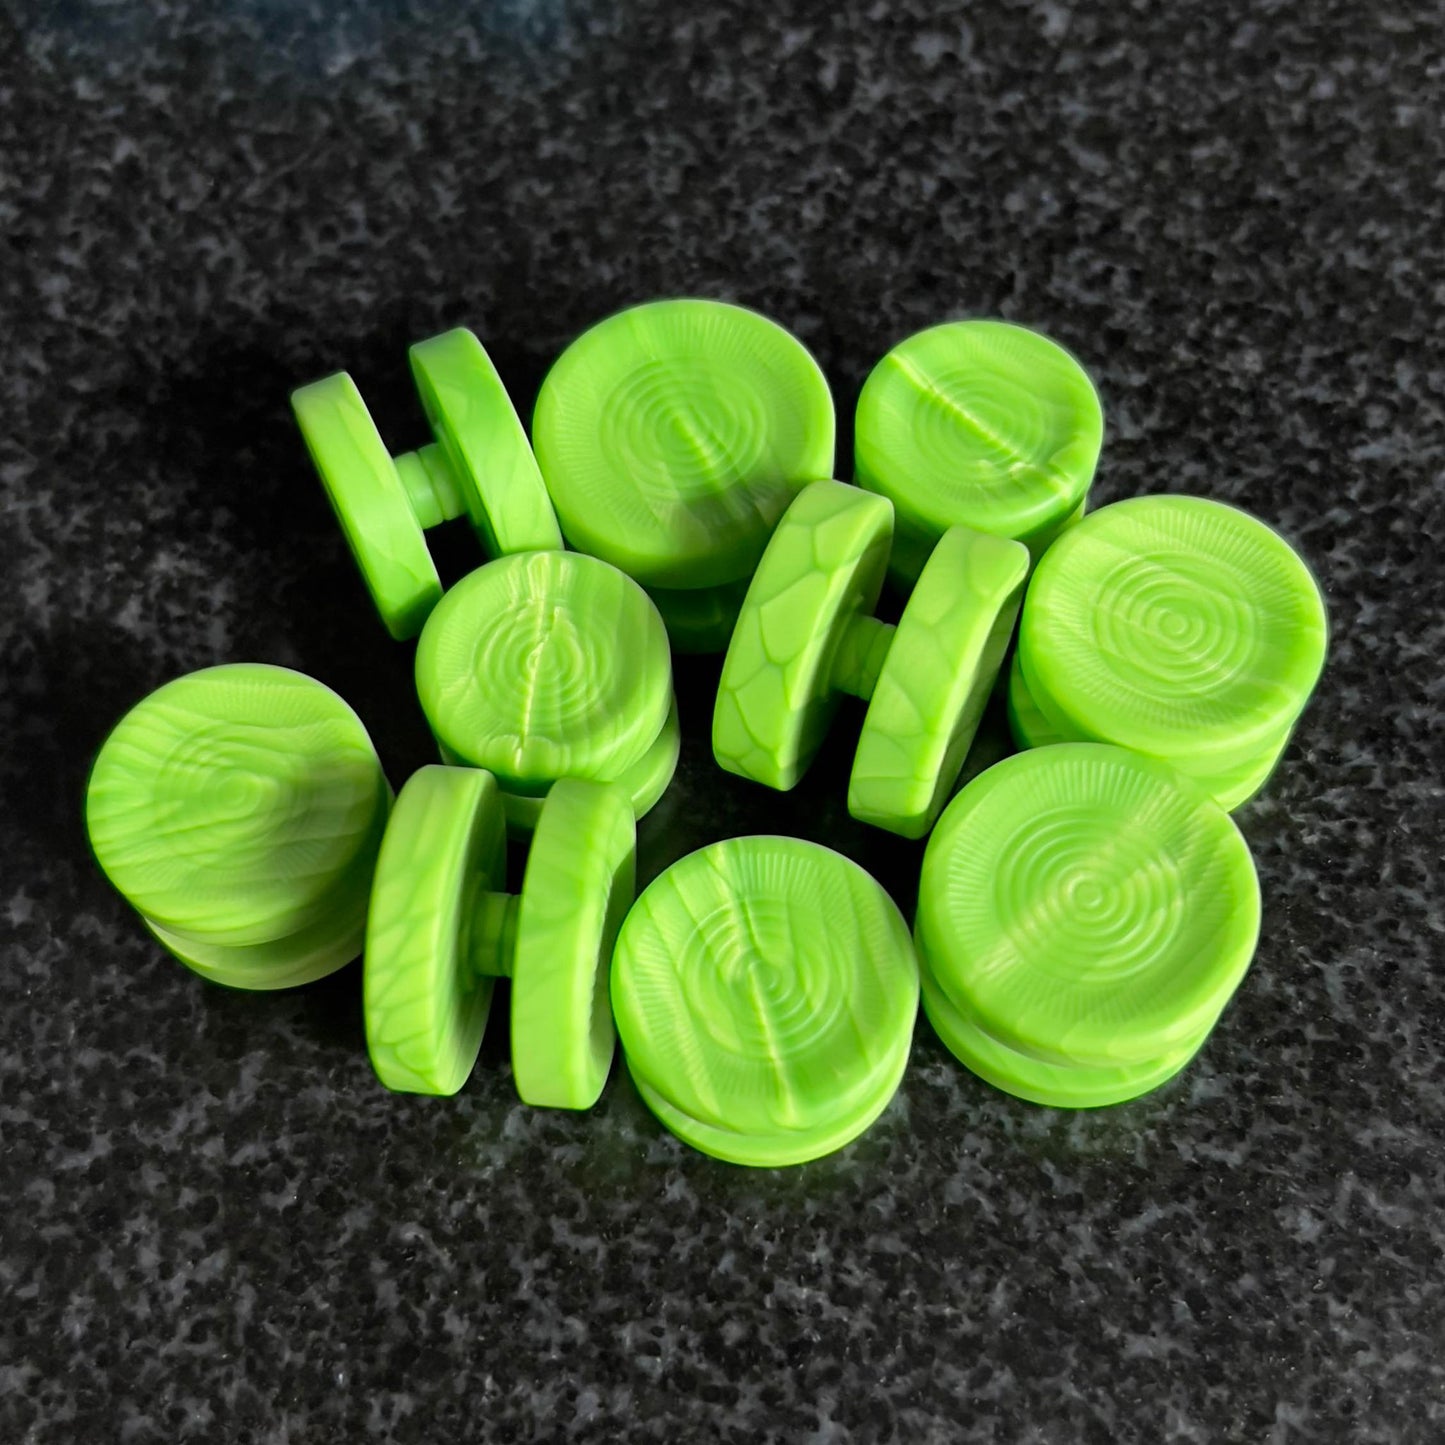 22mm x 16mm R188 Buttons